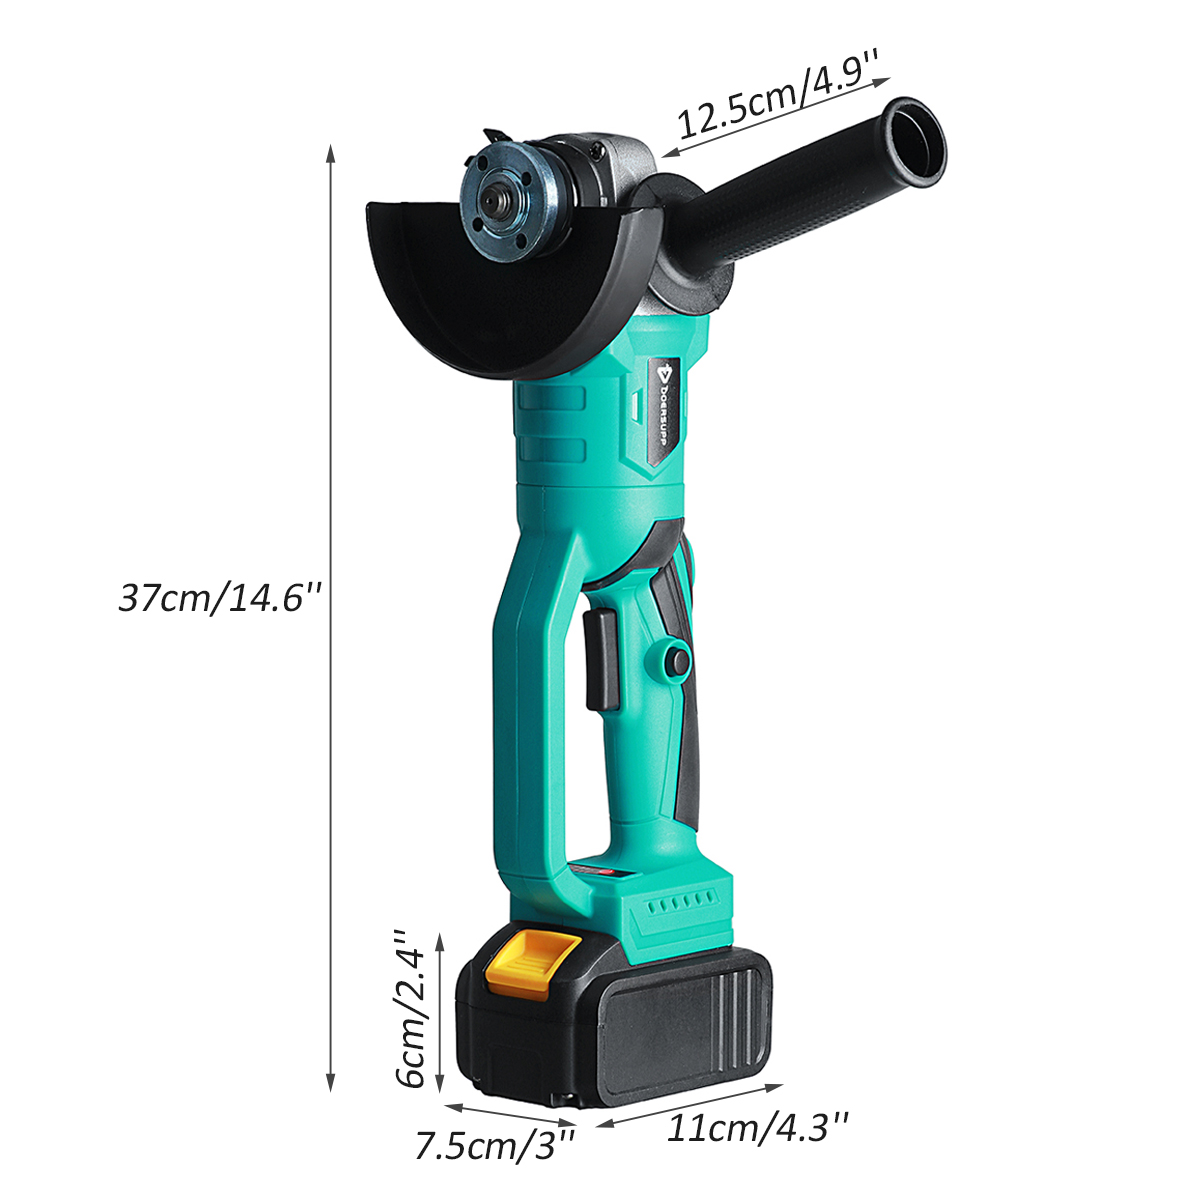 100125mm-Electric-Angle-Grinder-Chainsaw-Woodworking-Cutting-Chainsaw-Bracket-W-12pcs-Battery-1829242-16